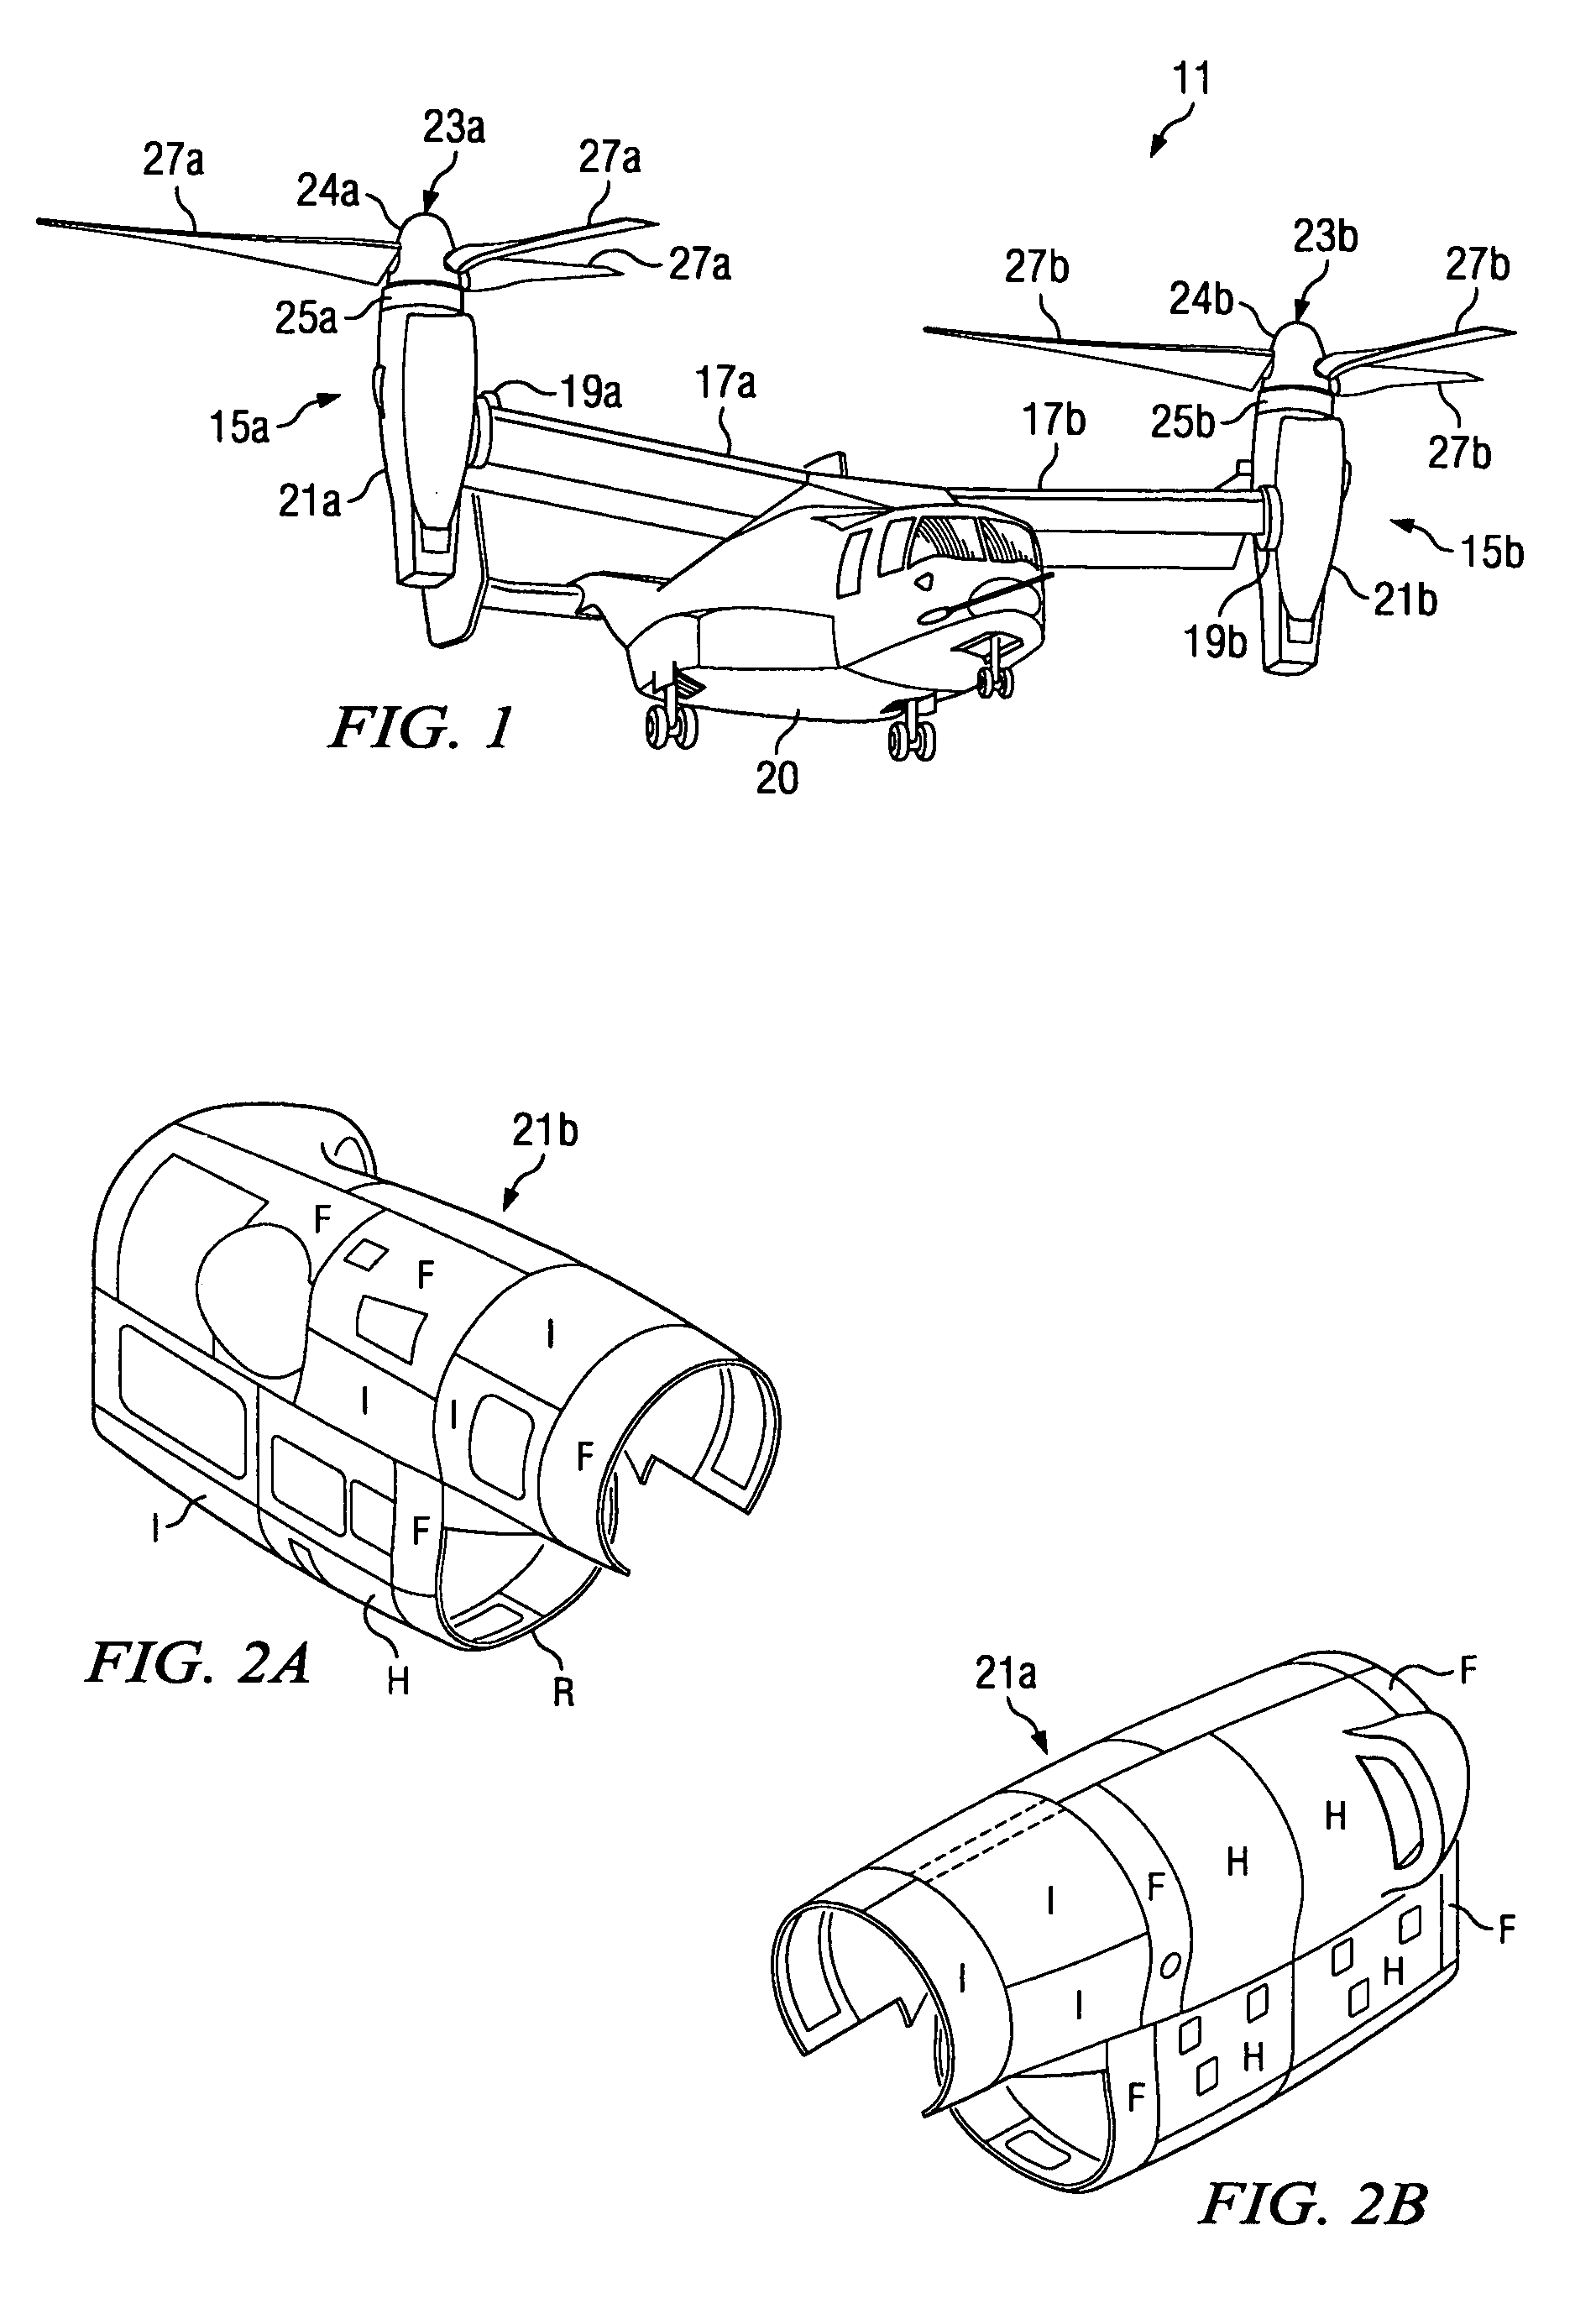 Method and apparatus for manufacturing interchangeable and replaceable parts